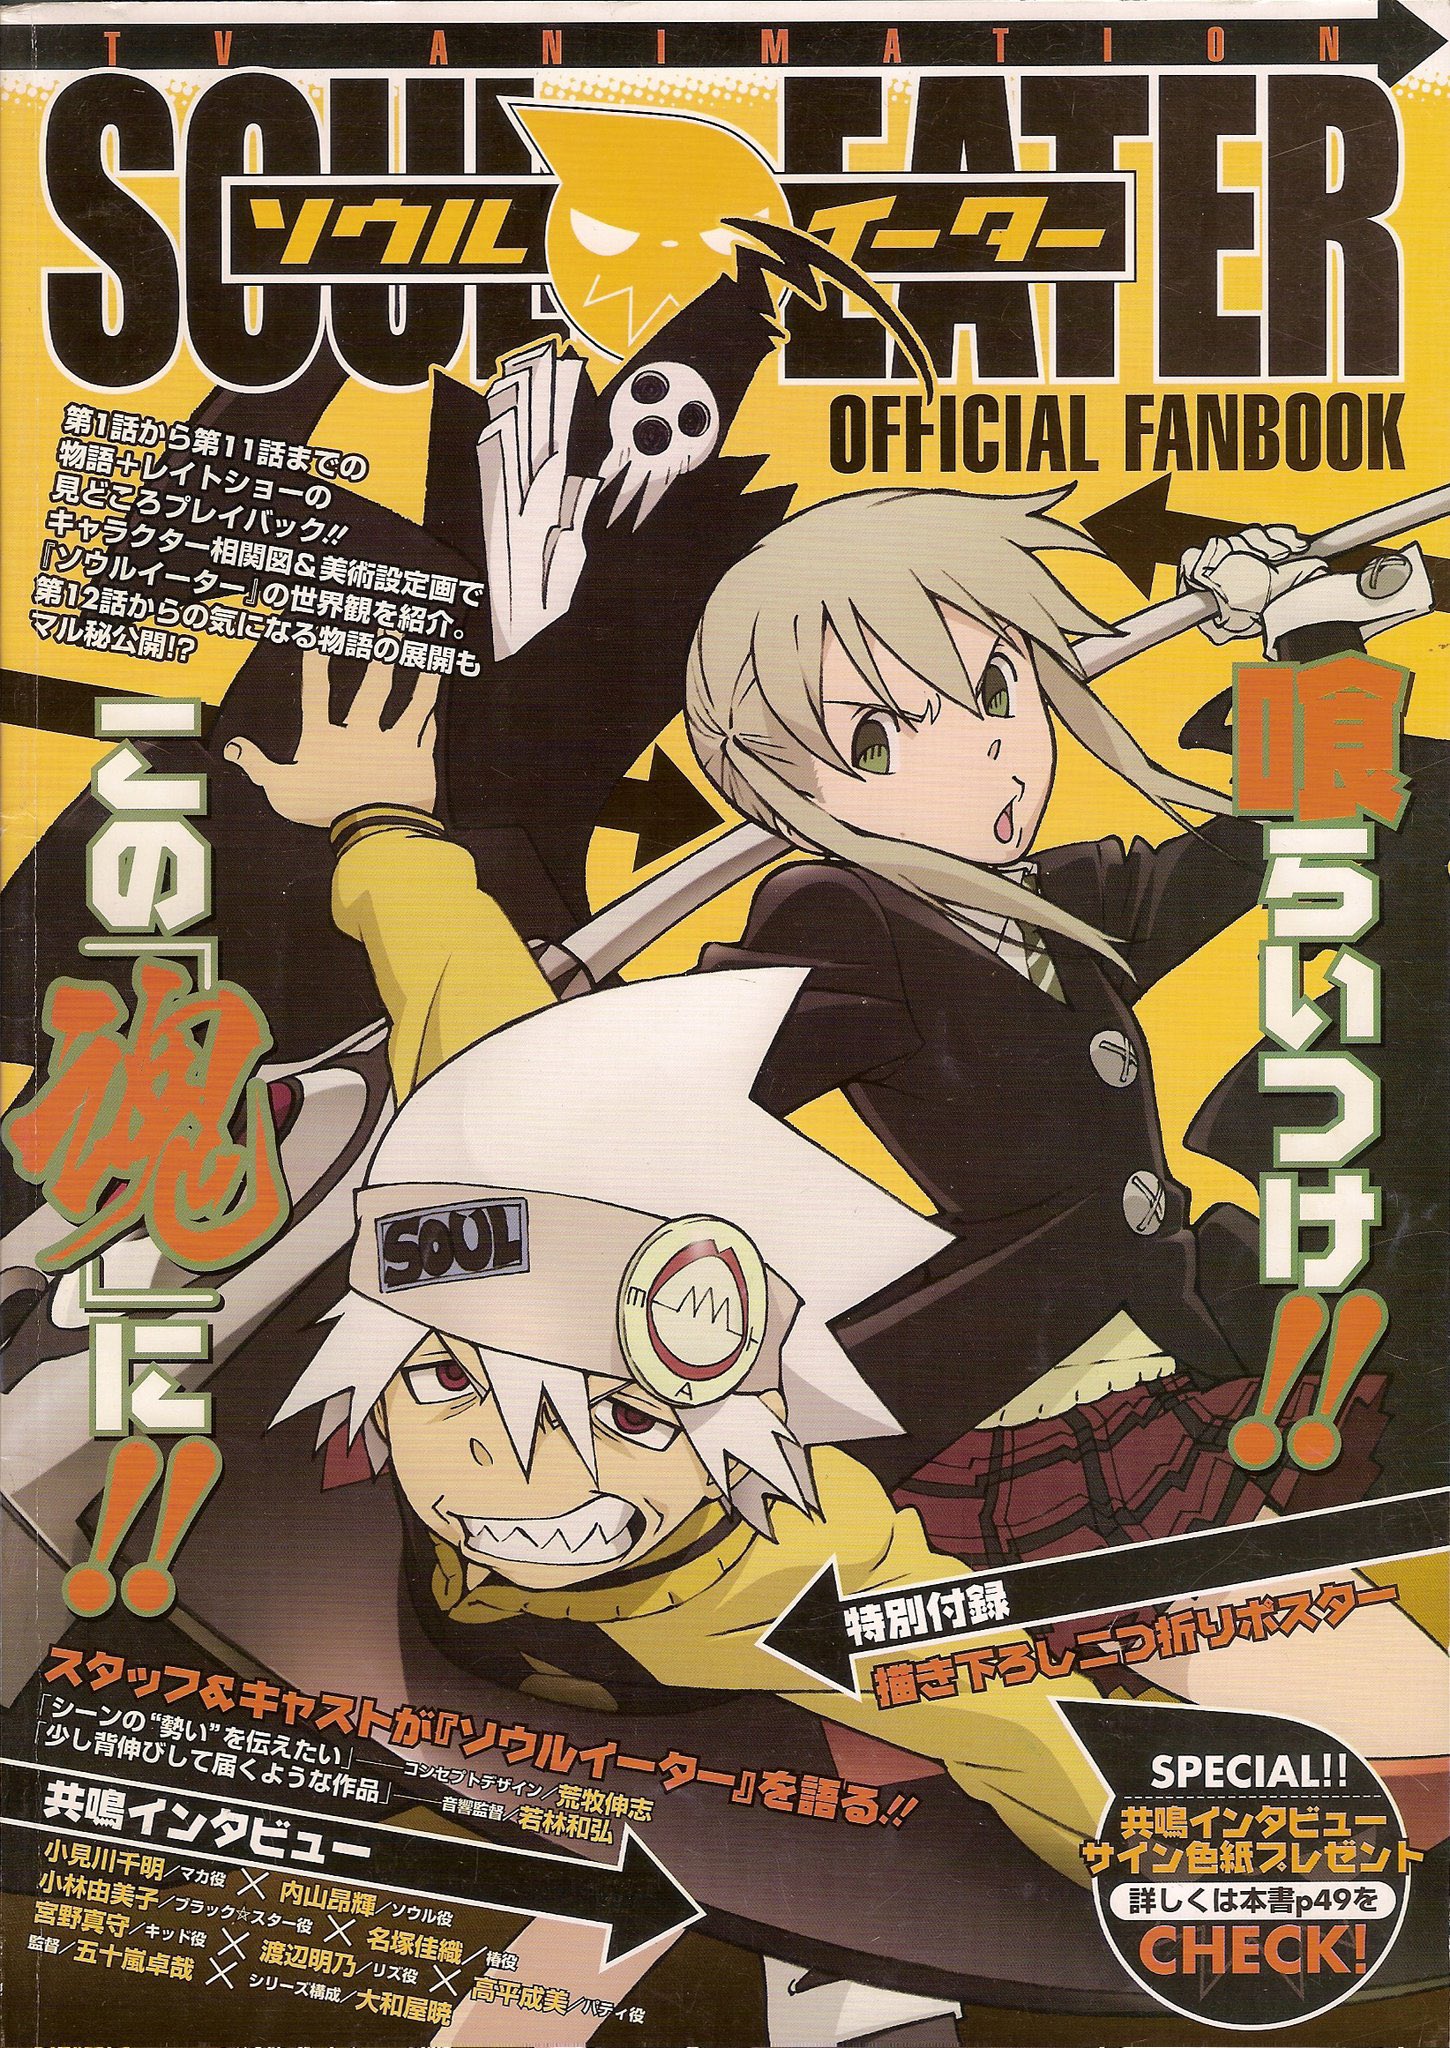 Is a Soul Eater Reboot Confirmed? on X: Day 3,527 There is no